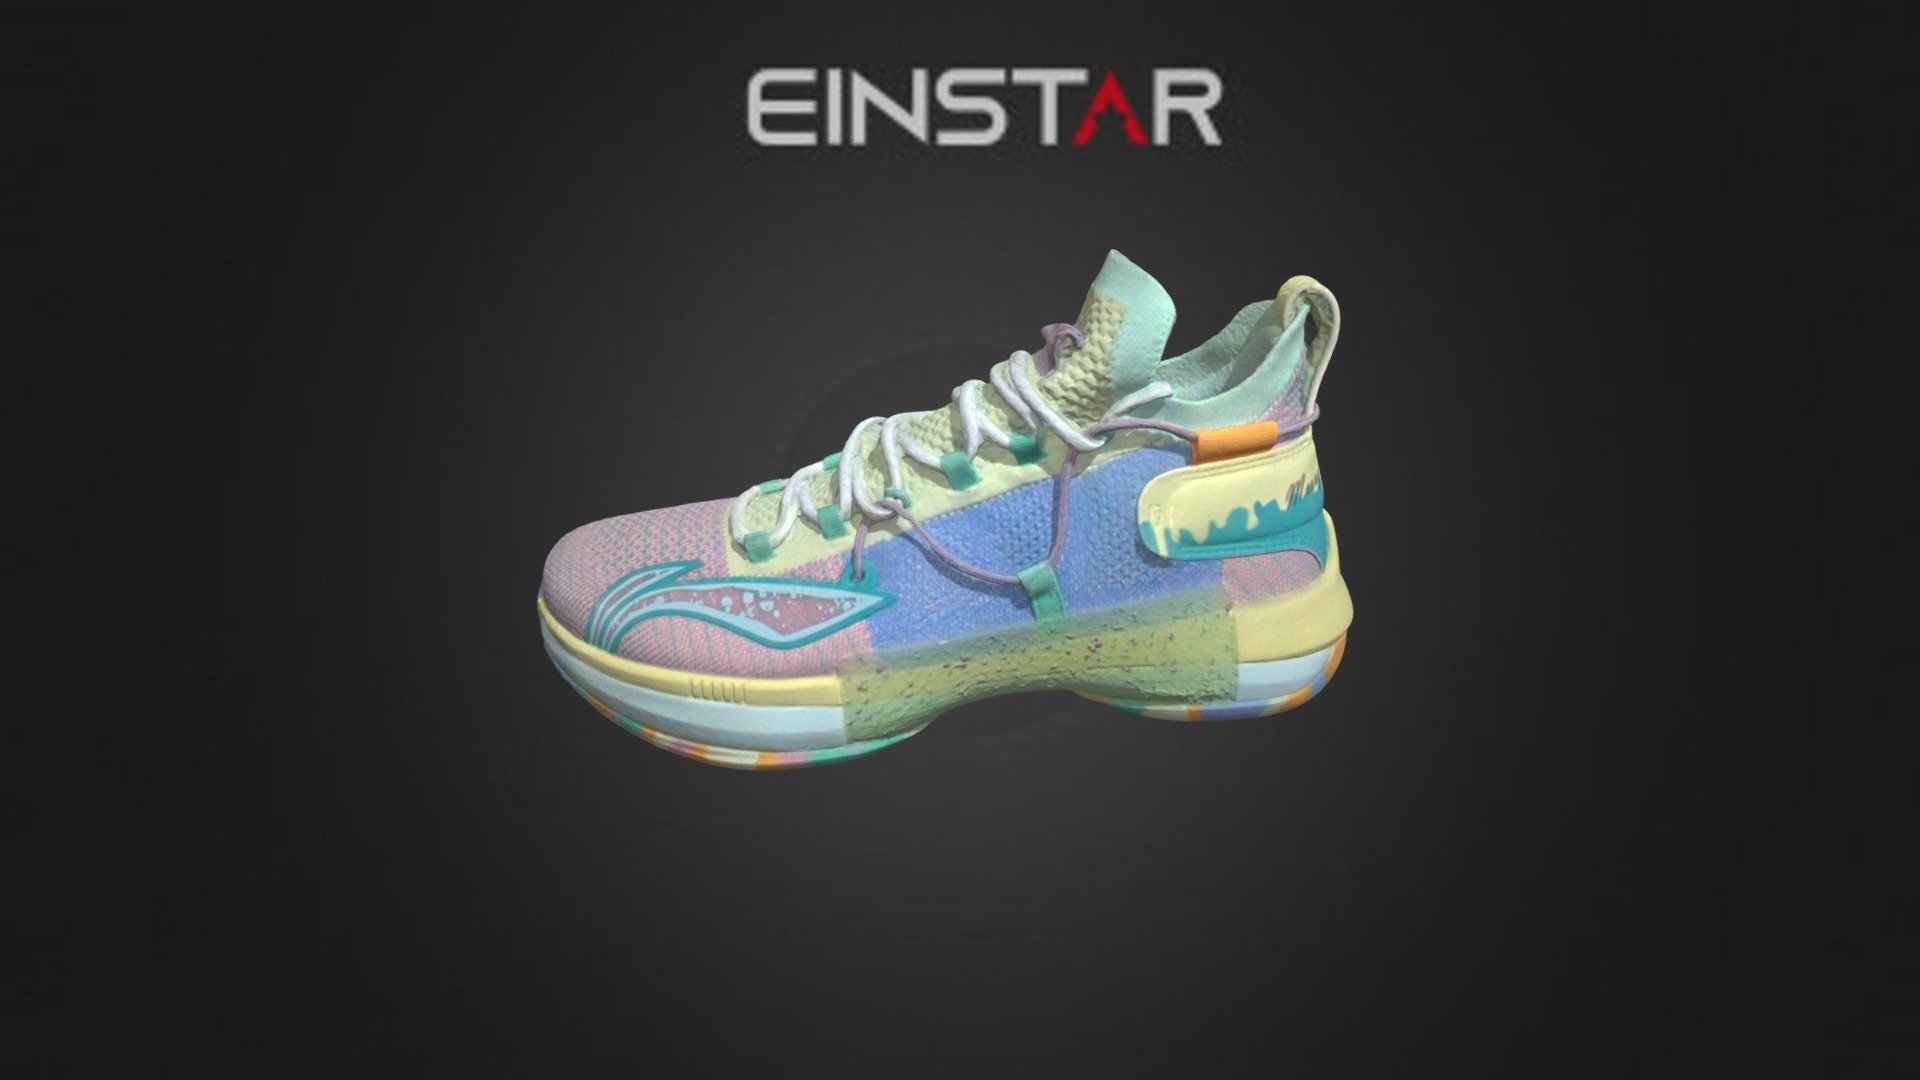 This shoe is scanned by Einstar. It's very colorful.

Know more about Einstar: 

Website: https://www.einstar.com/

Facebook: https://www.facebook.com/Einstar3d

Instagram: https://www.instagram.com/einstar3d/

Tiktok: https://www.tiktok.com/@einstar3d - Shoe [Einstar] - 3D model by SHINING 3D (@einscan) 3d model